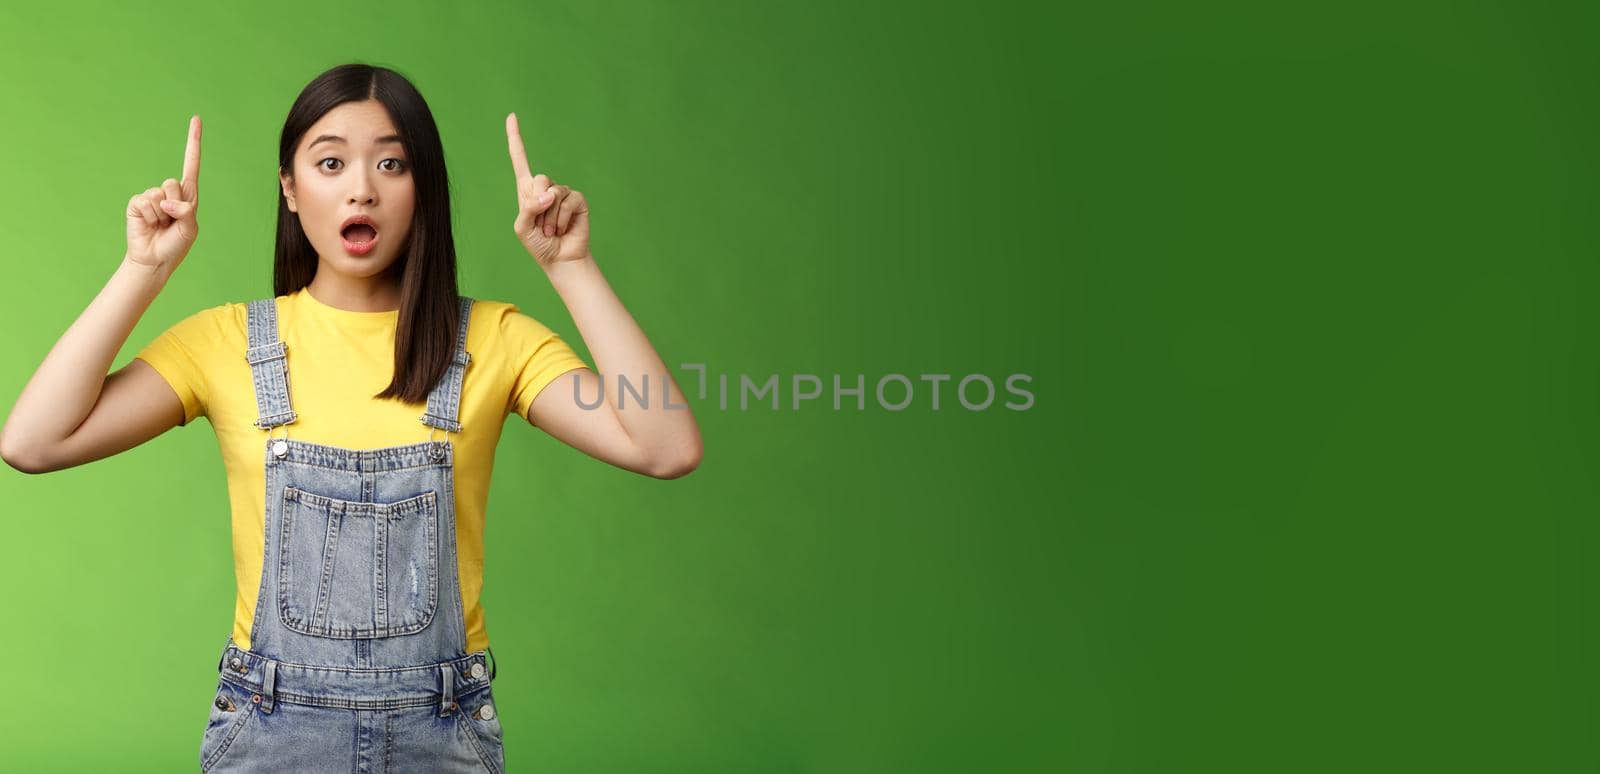 Impressed speechless shocked asian girl, pointing fingers up, drop jaw gasping astonished, stare camera amazed, telling about incredible prices new products, stand green background. Copy space